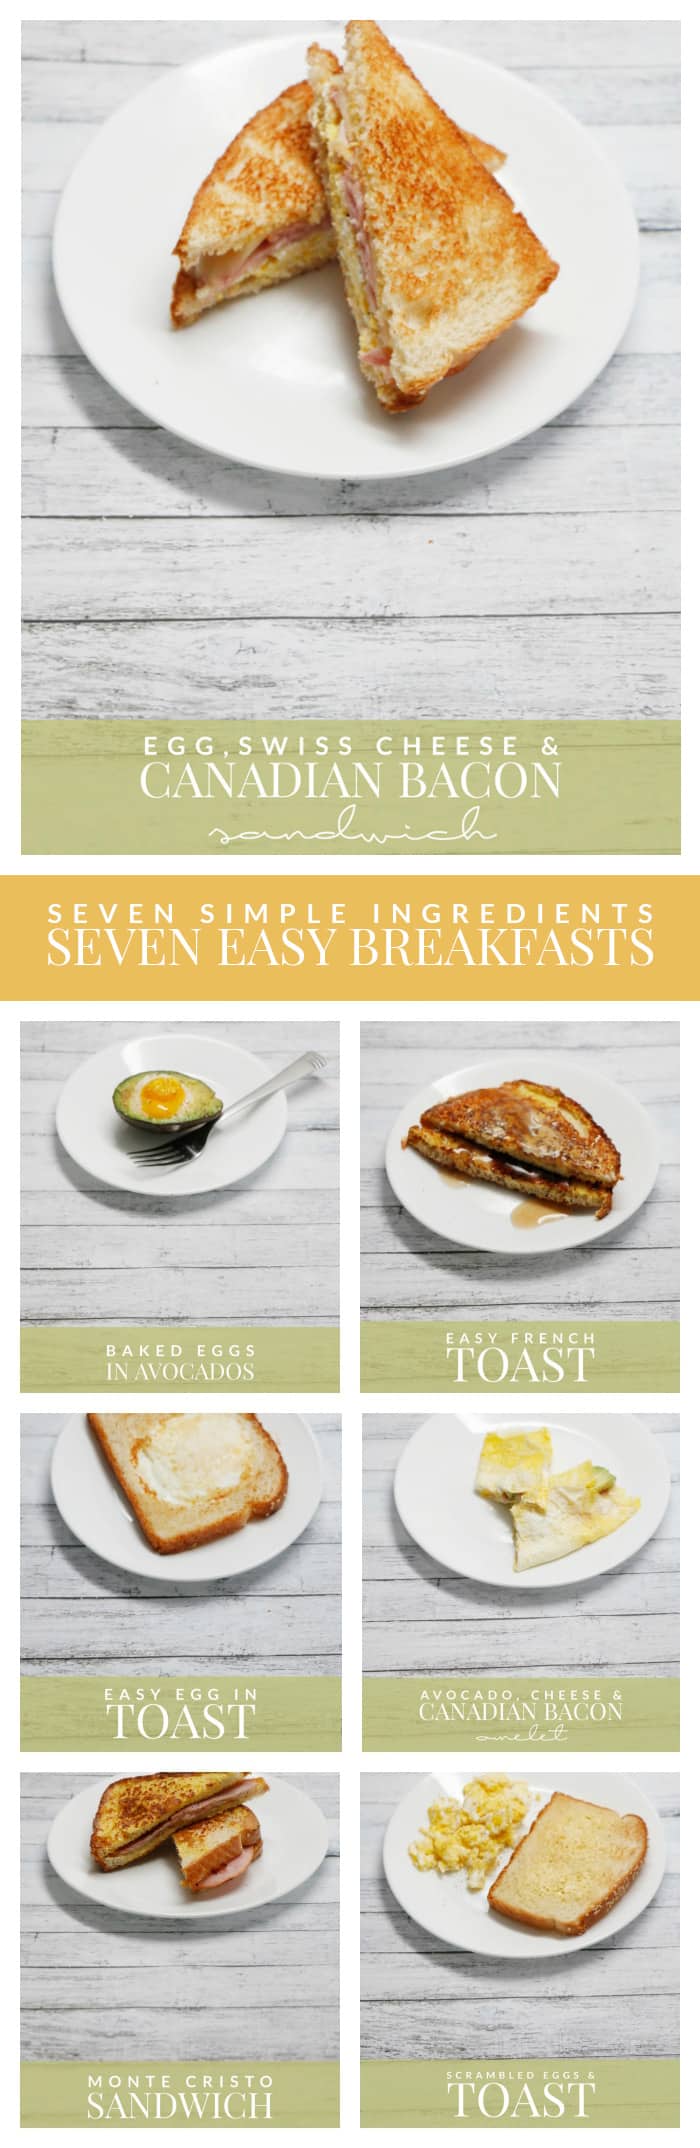 These seven easy breakfasts are made from only seven ingredients that you can find at nearly any grocery store. Easy, delicious + something for everyone!